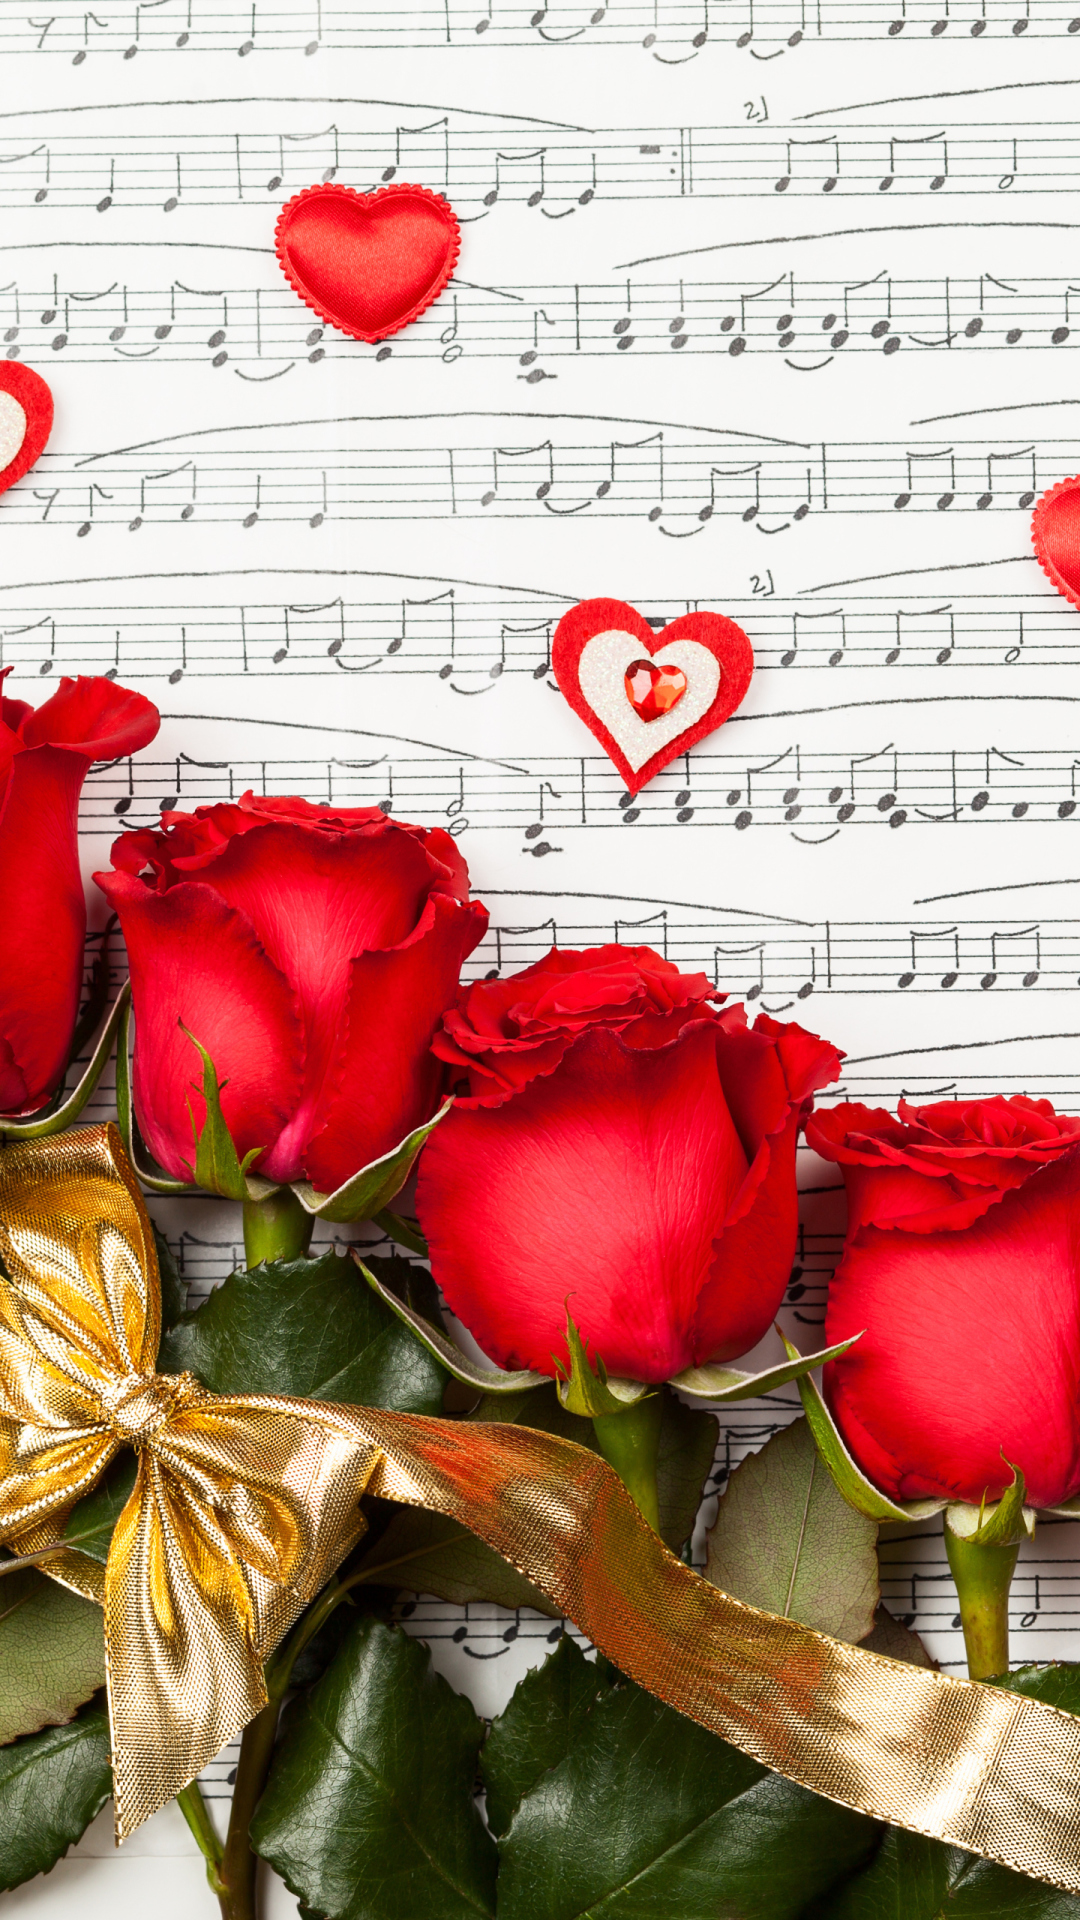 Das Roses, Love And Music Wallpaper 1080x1920